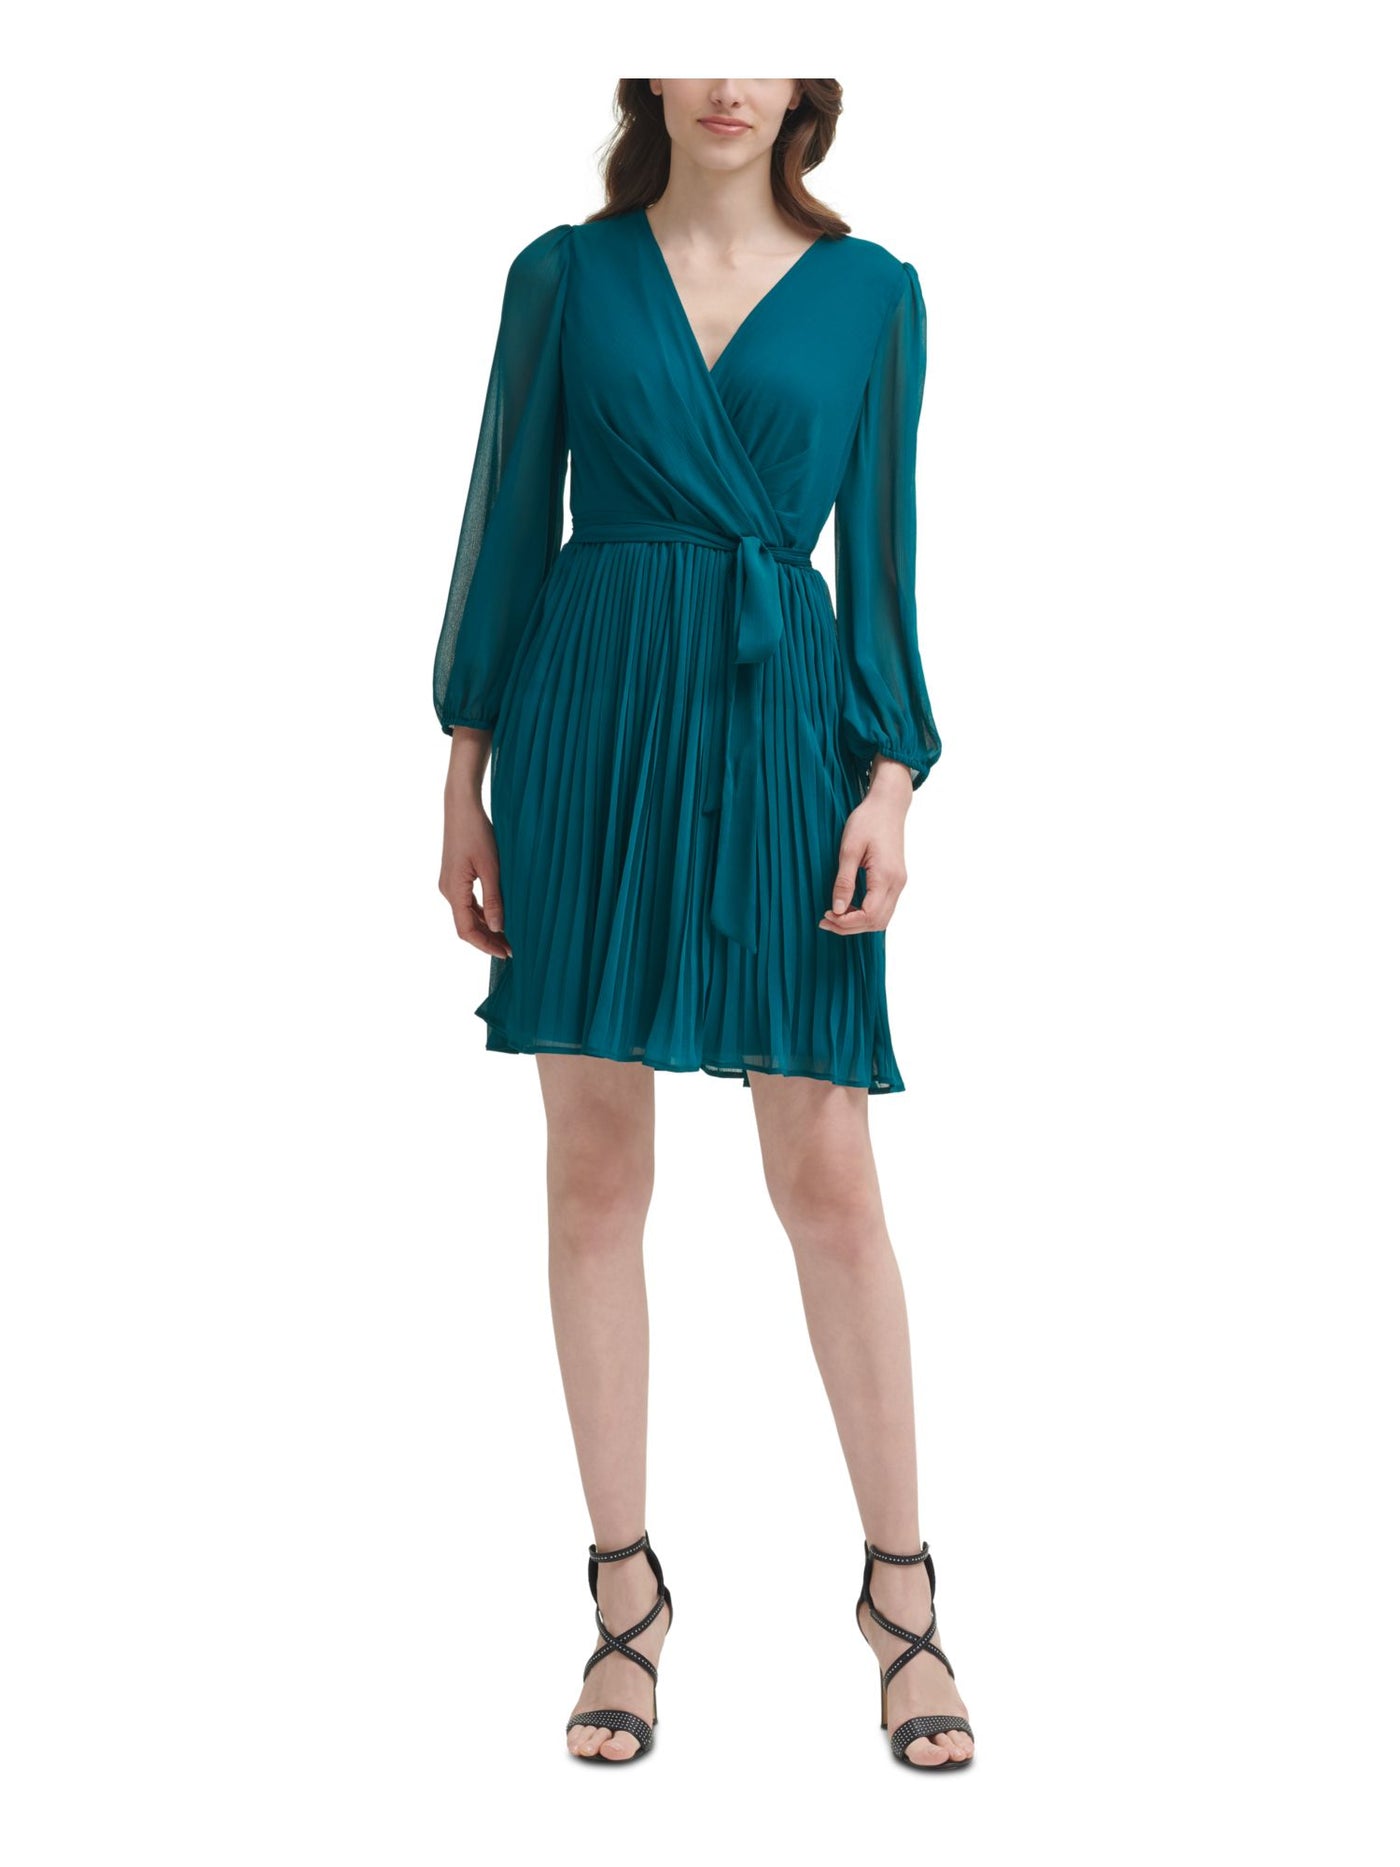 DKNY Womens Green Tie Zippered Balloon Sleeve Surplice Neckline Above The Knee Cocktail Knife Pleated Dress 4